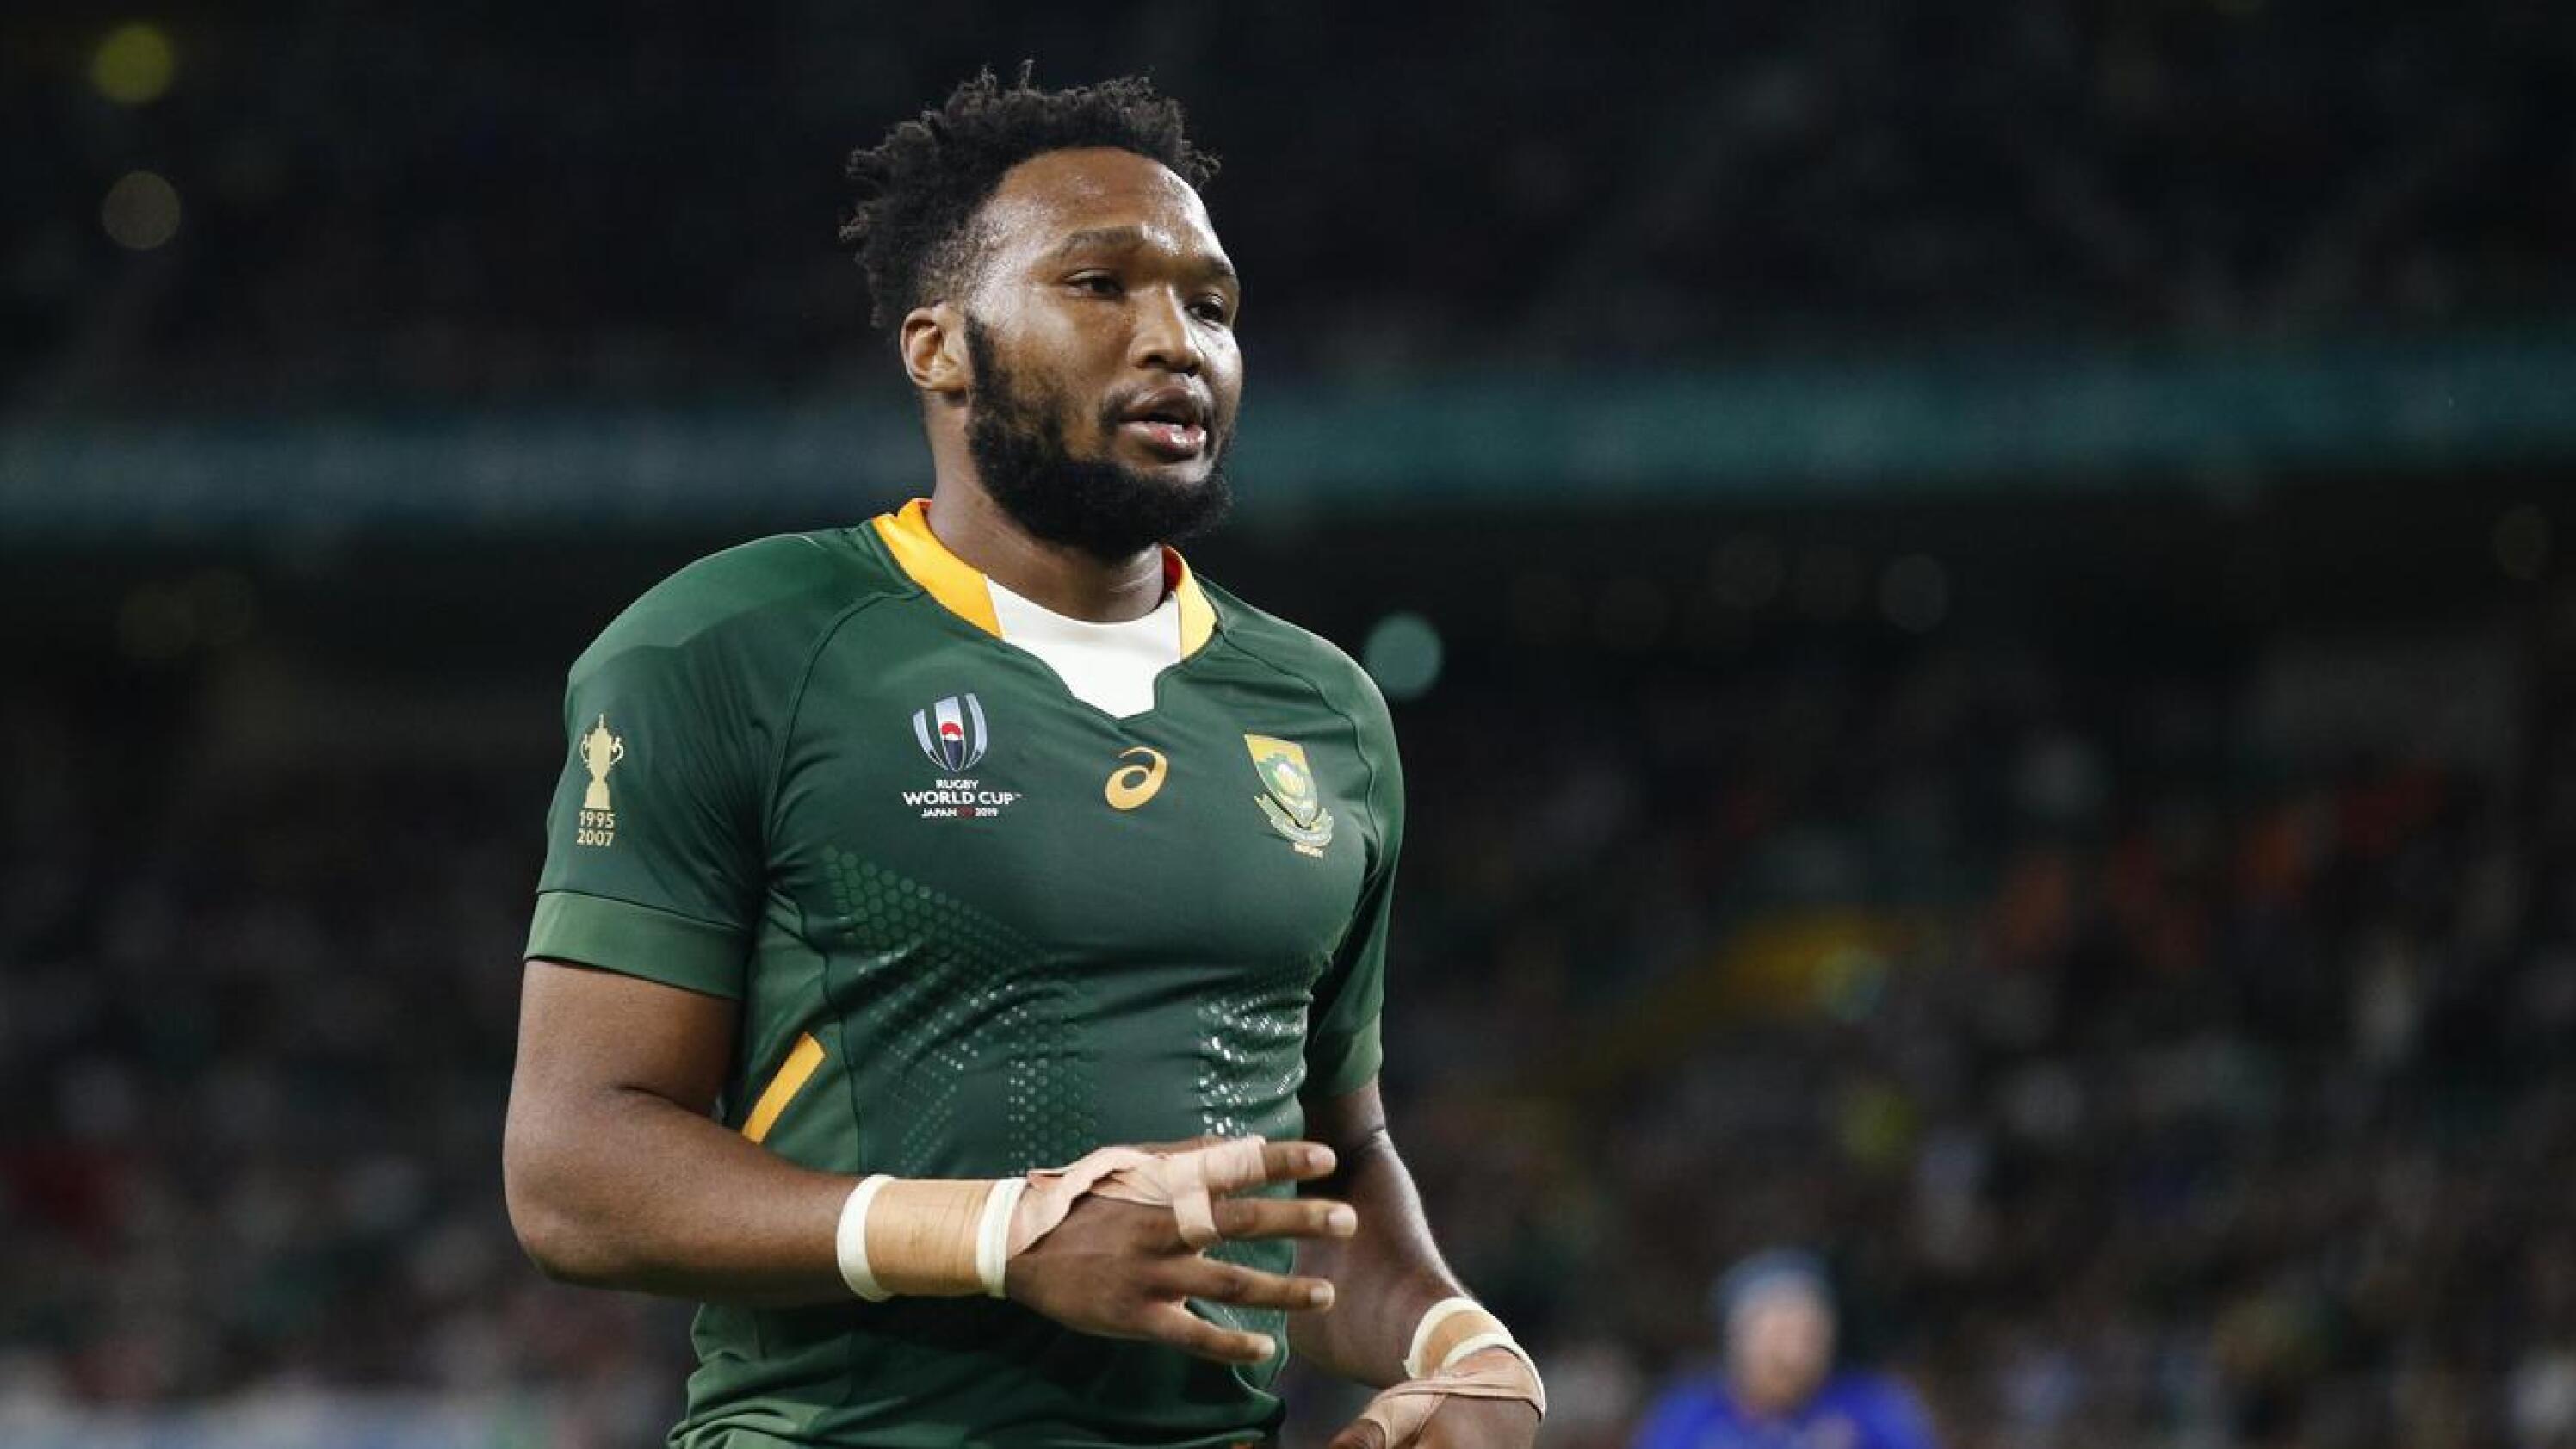 World Cup-winning Springbok centre Lukhanyo Am will captain a strong SA ’A’ team for Wednesday’s clash against the British and Irish Lions